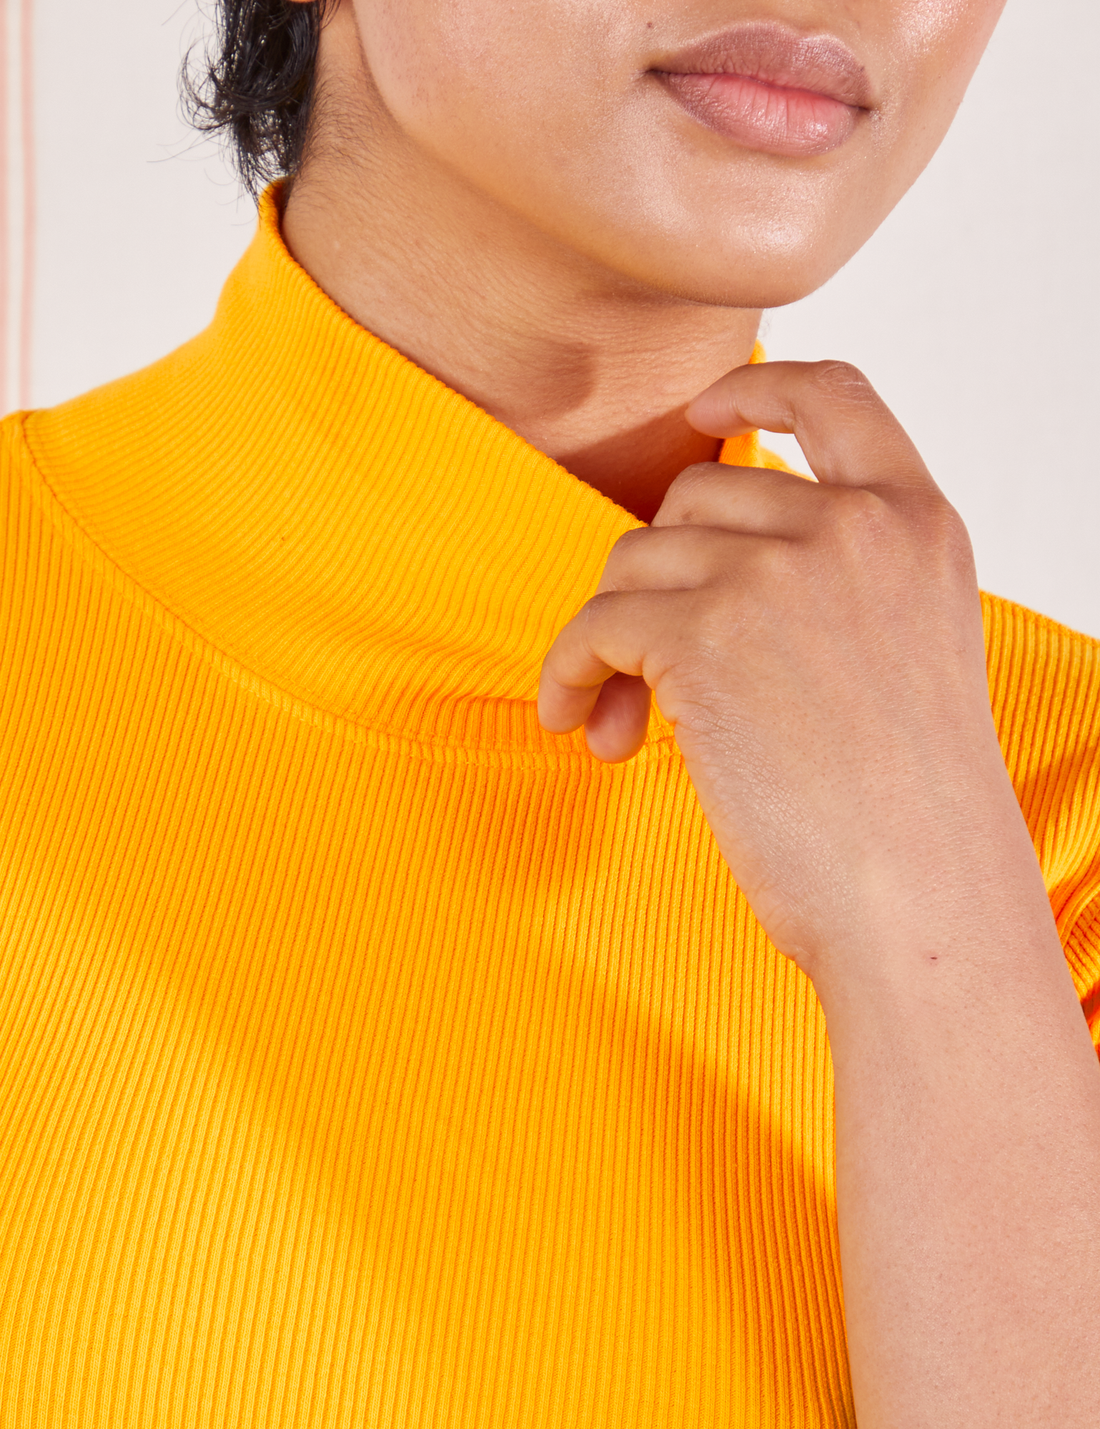 1/2 Sleeve Essential Turtleneck in Sunshine Yellow top front close up. Mika is holding onto the collar of the turtleneck